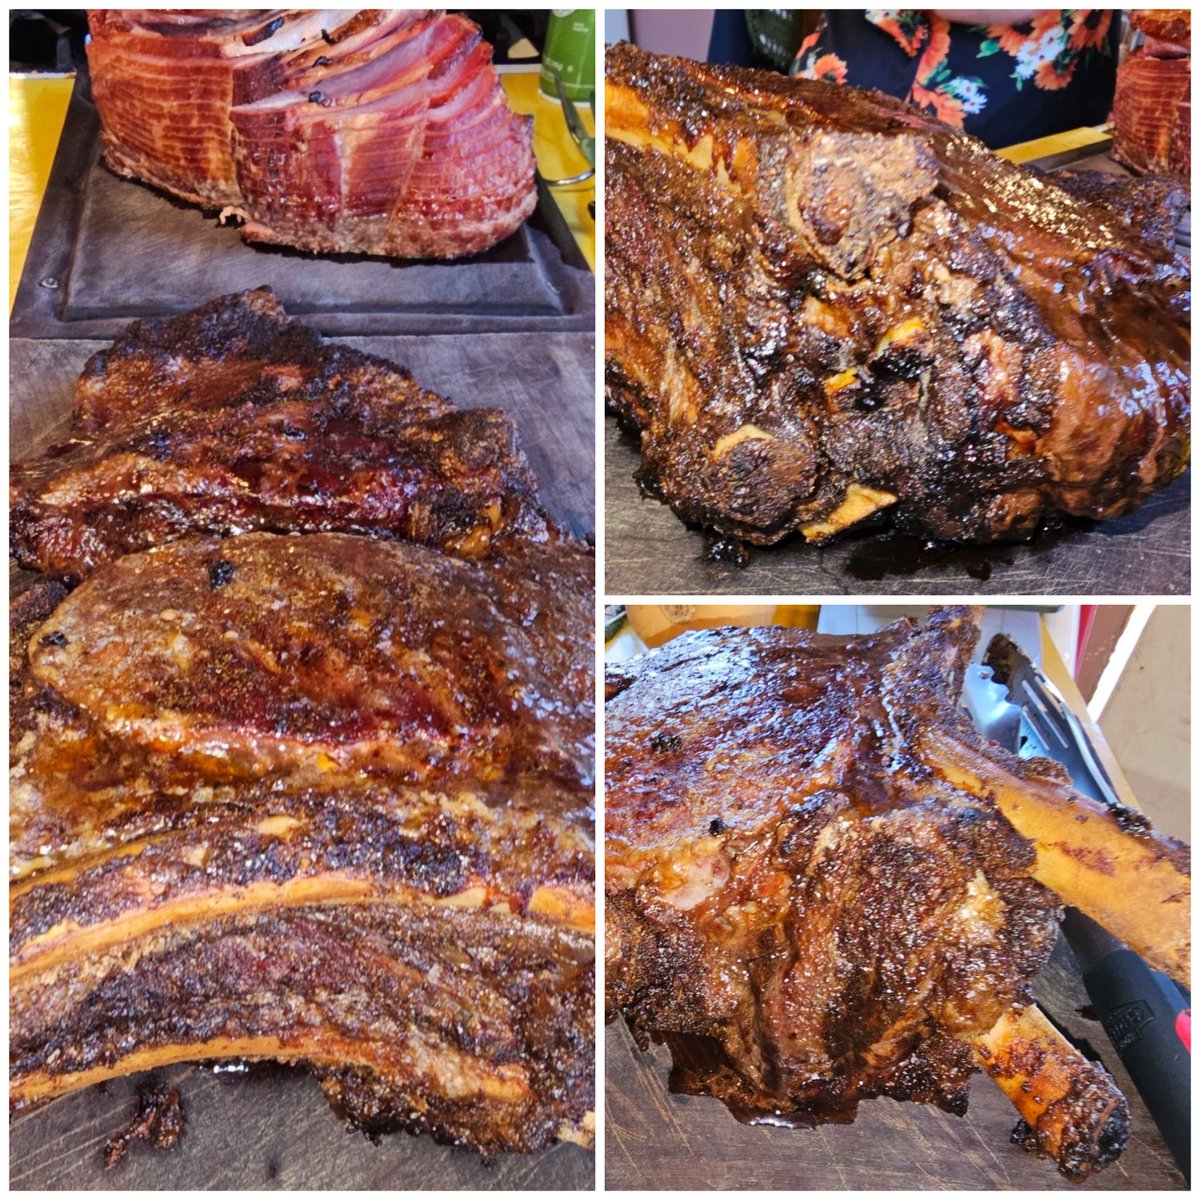 Smoked standing Rib roast was meat two of three offered today. 
#AzrielAsItGets 
#SmokedMeats
#StandingRibRoast